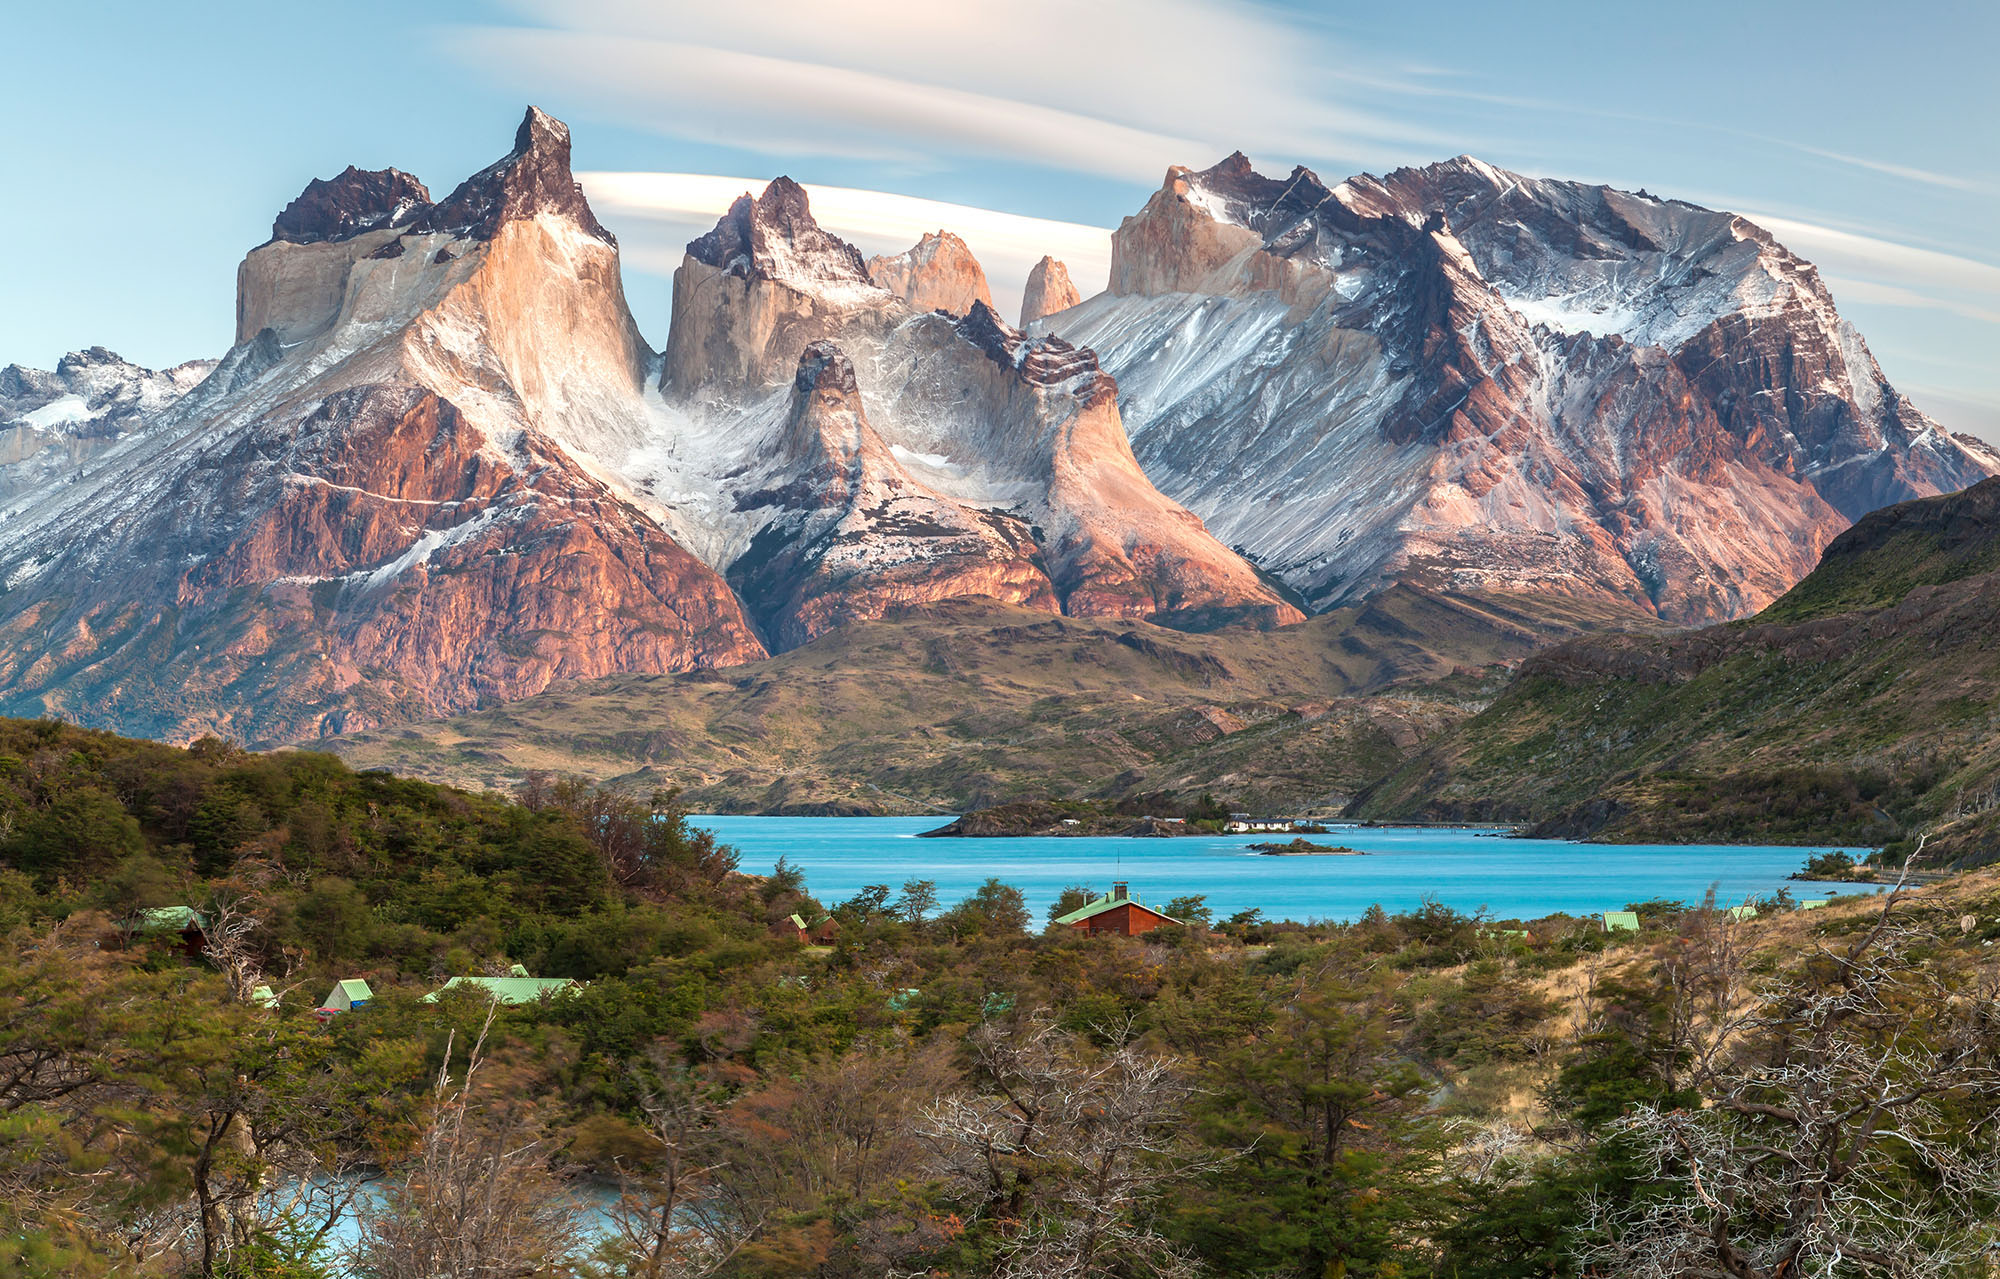 A view of the Cuernos del Paine, a cluster of steep granite peaks in Chile’s Torres del Paine National Park